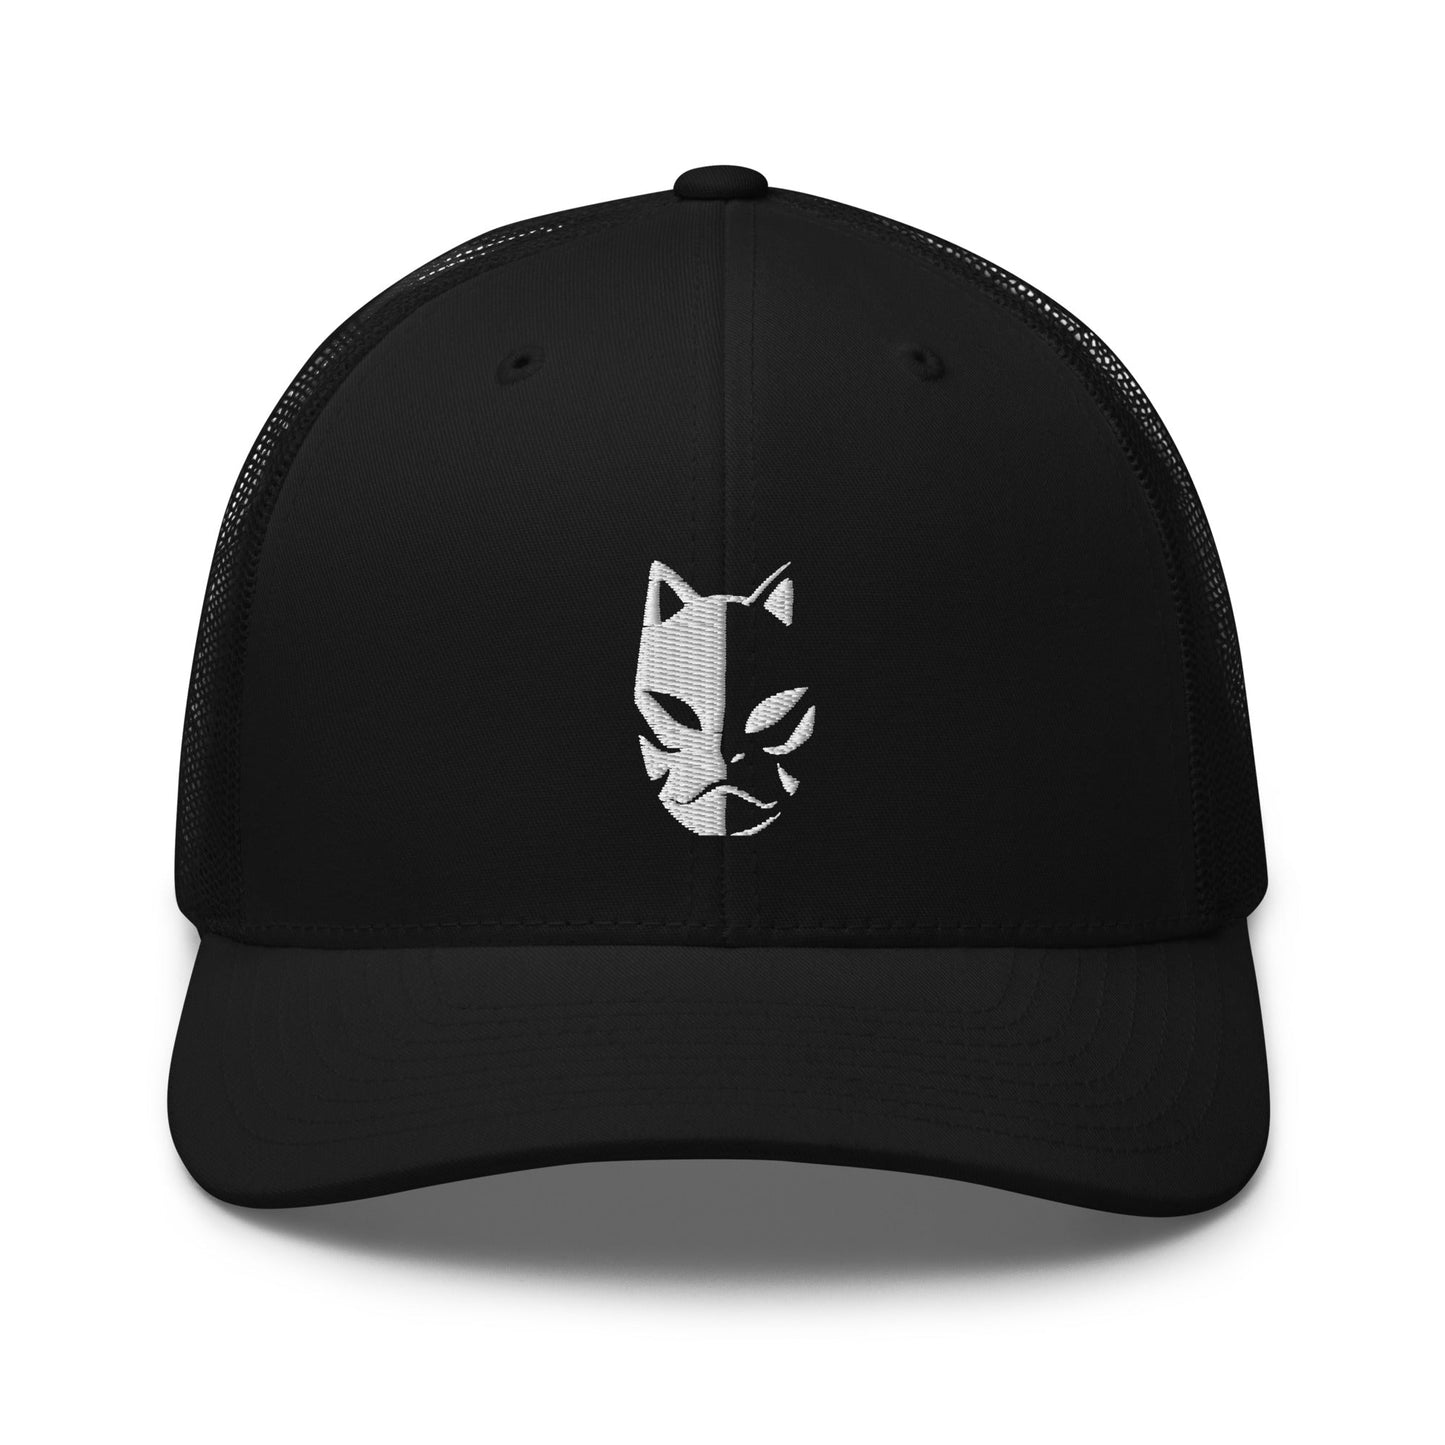 Anbu Mask Embroidered Trucker Hat